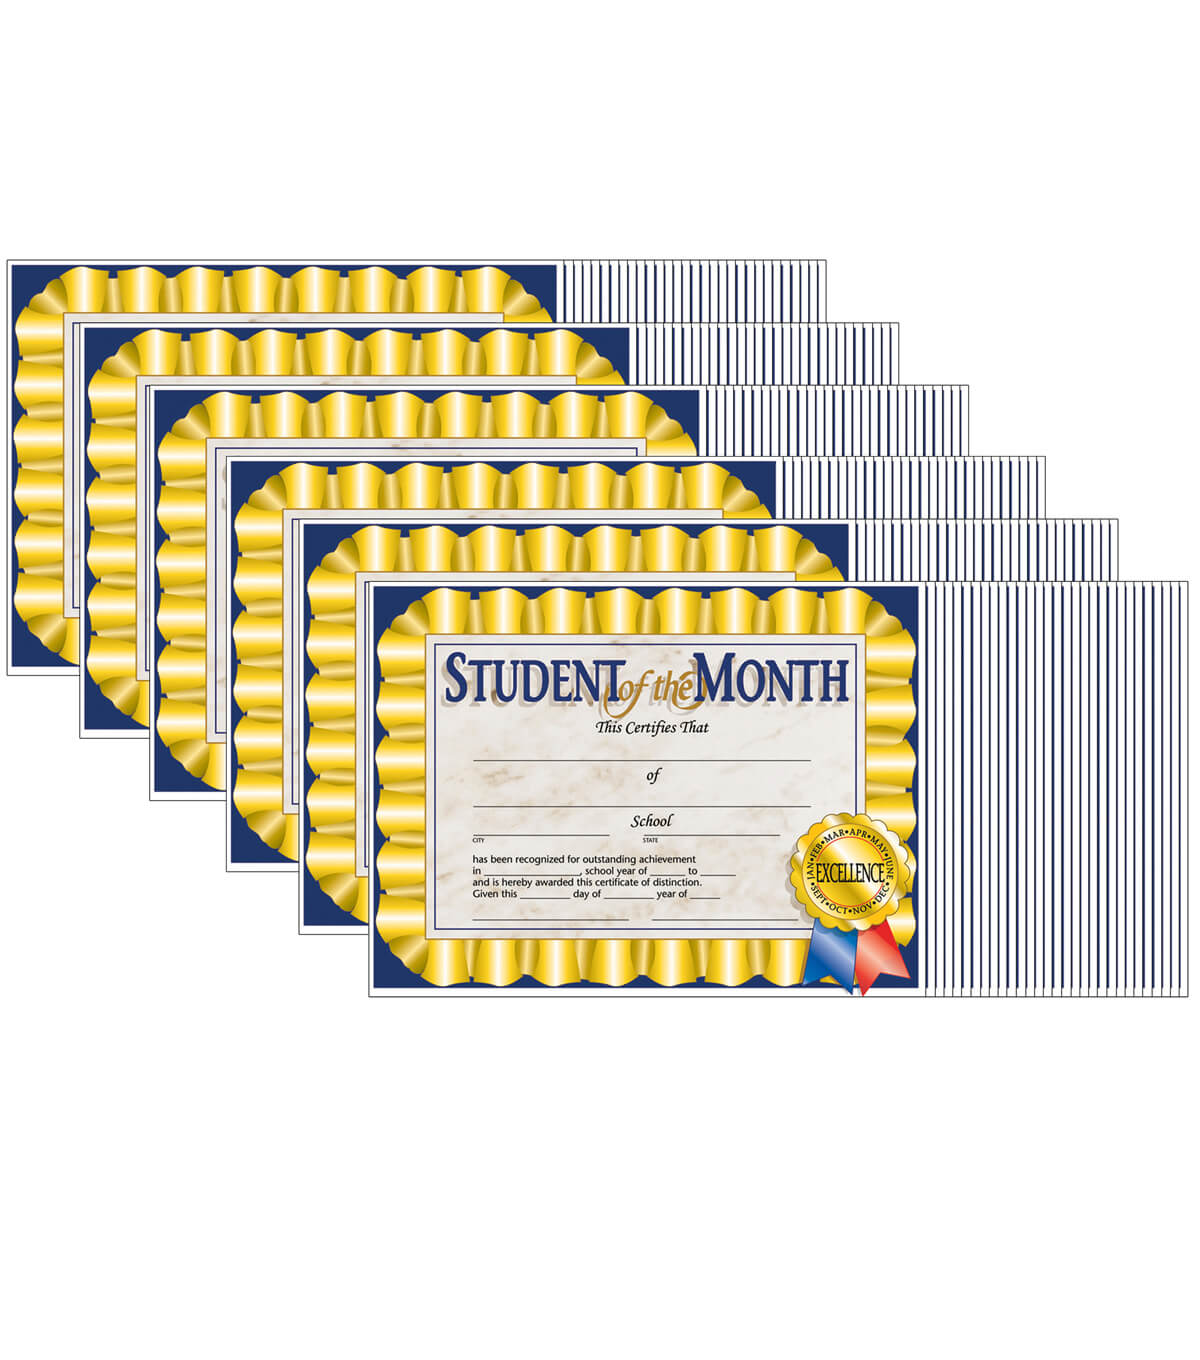 Hayes Student Of The Month Certificate, 30 Per Pack, 6 Packs Intended For Hayes Certificate Templates